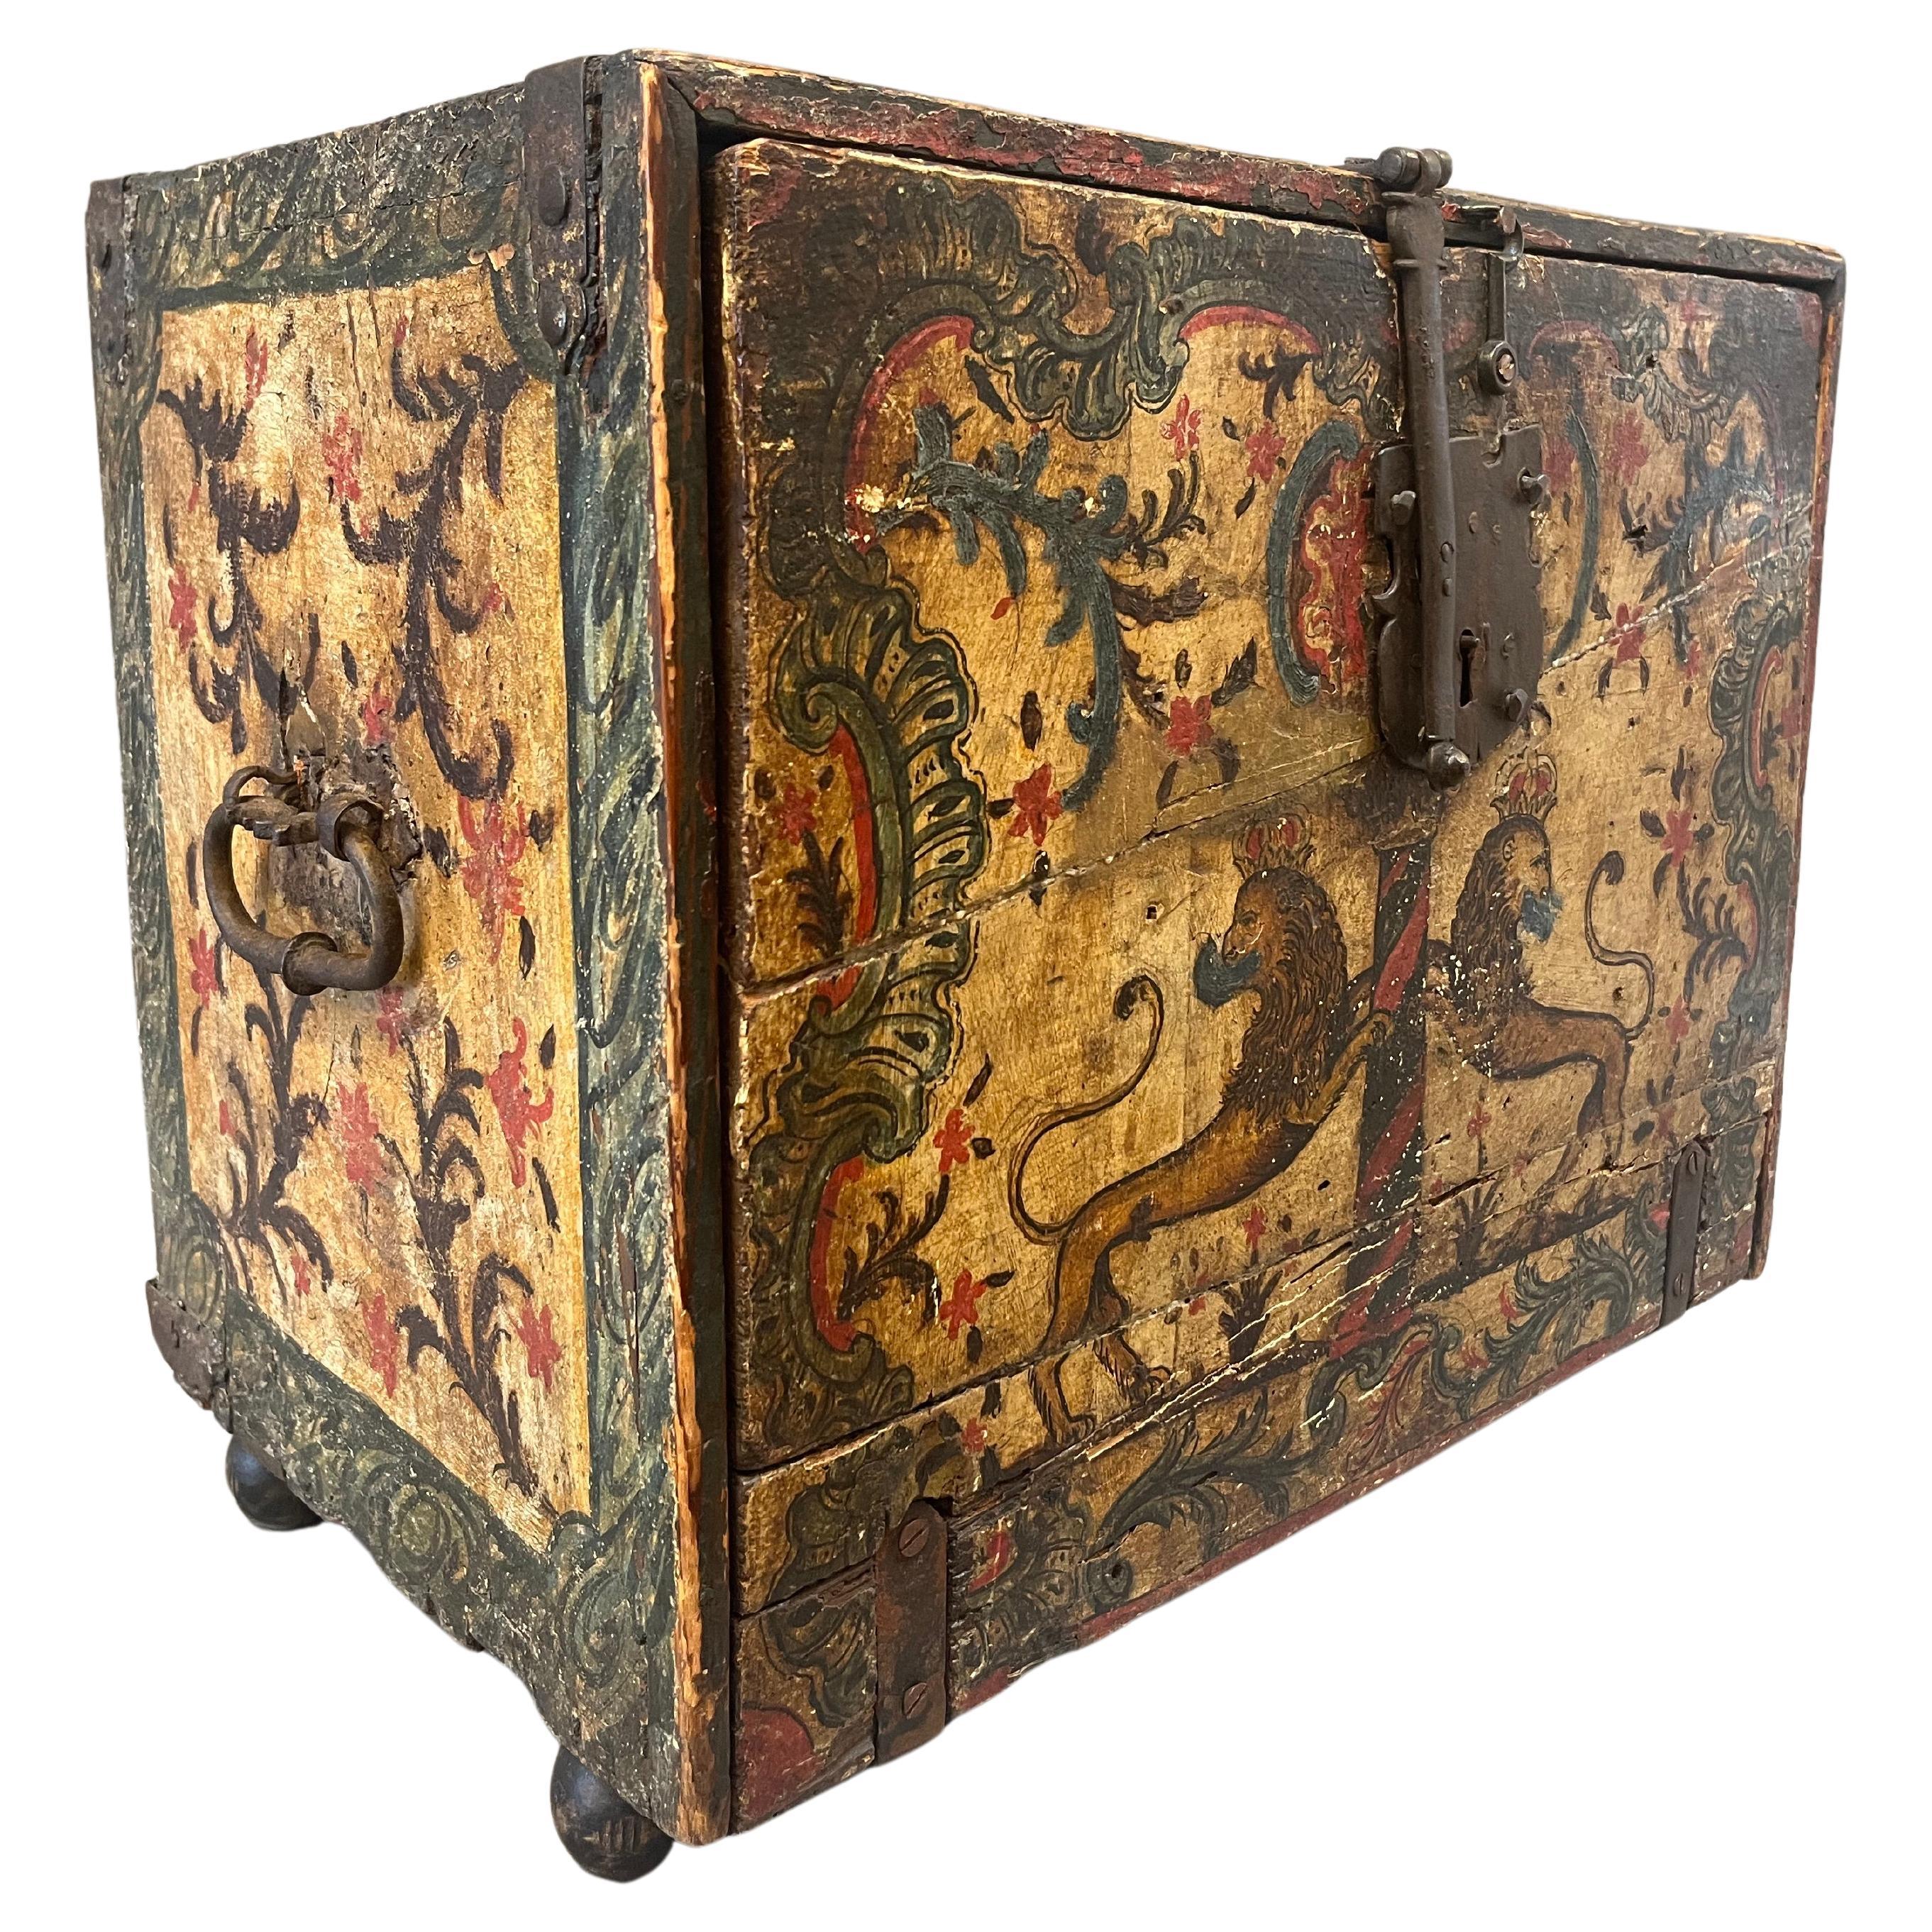 Rare Early 17th Century Portuguese "Fall Front" Miniature Chest